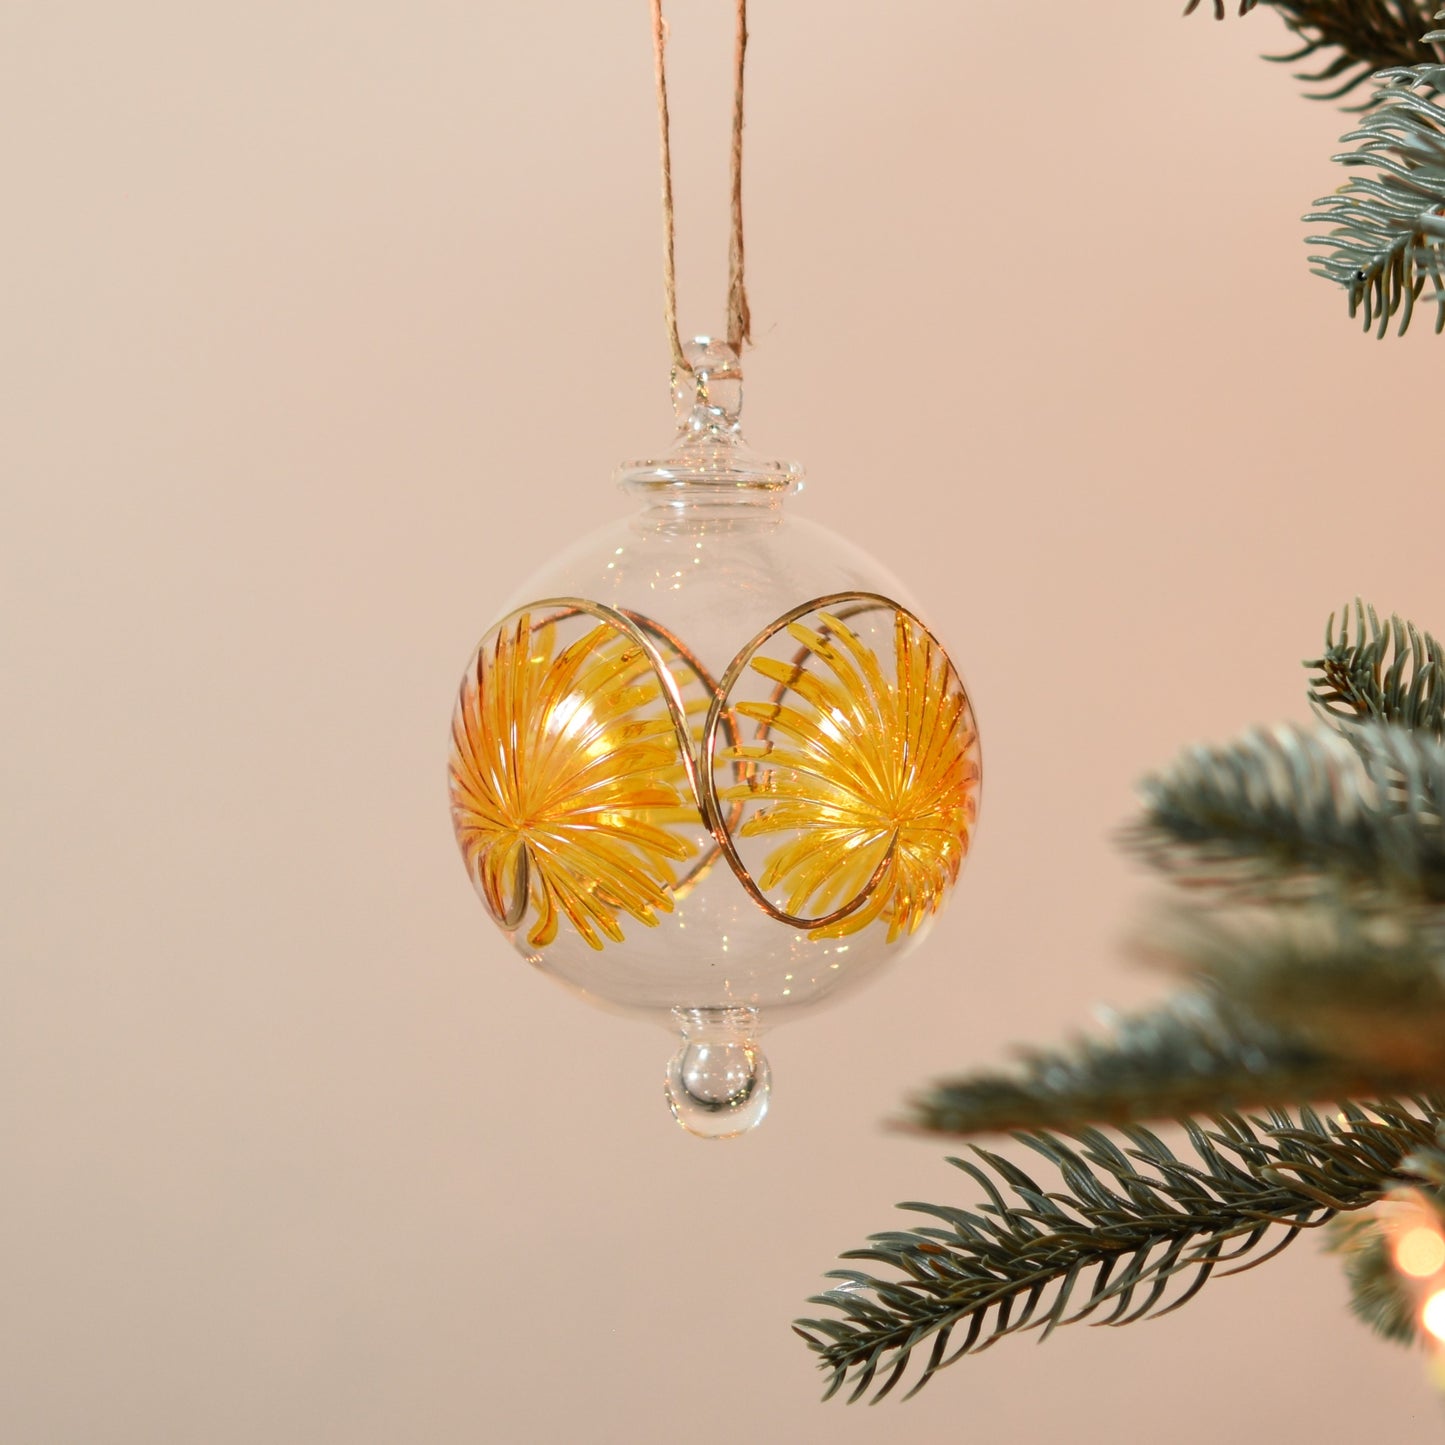 Palm Handblown Glass Bauble - Gold & Amber - Large